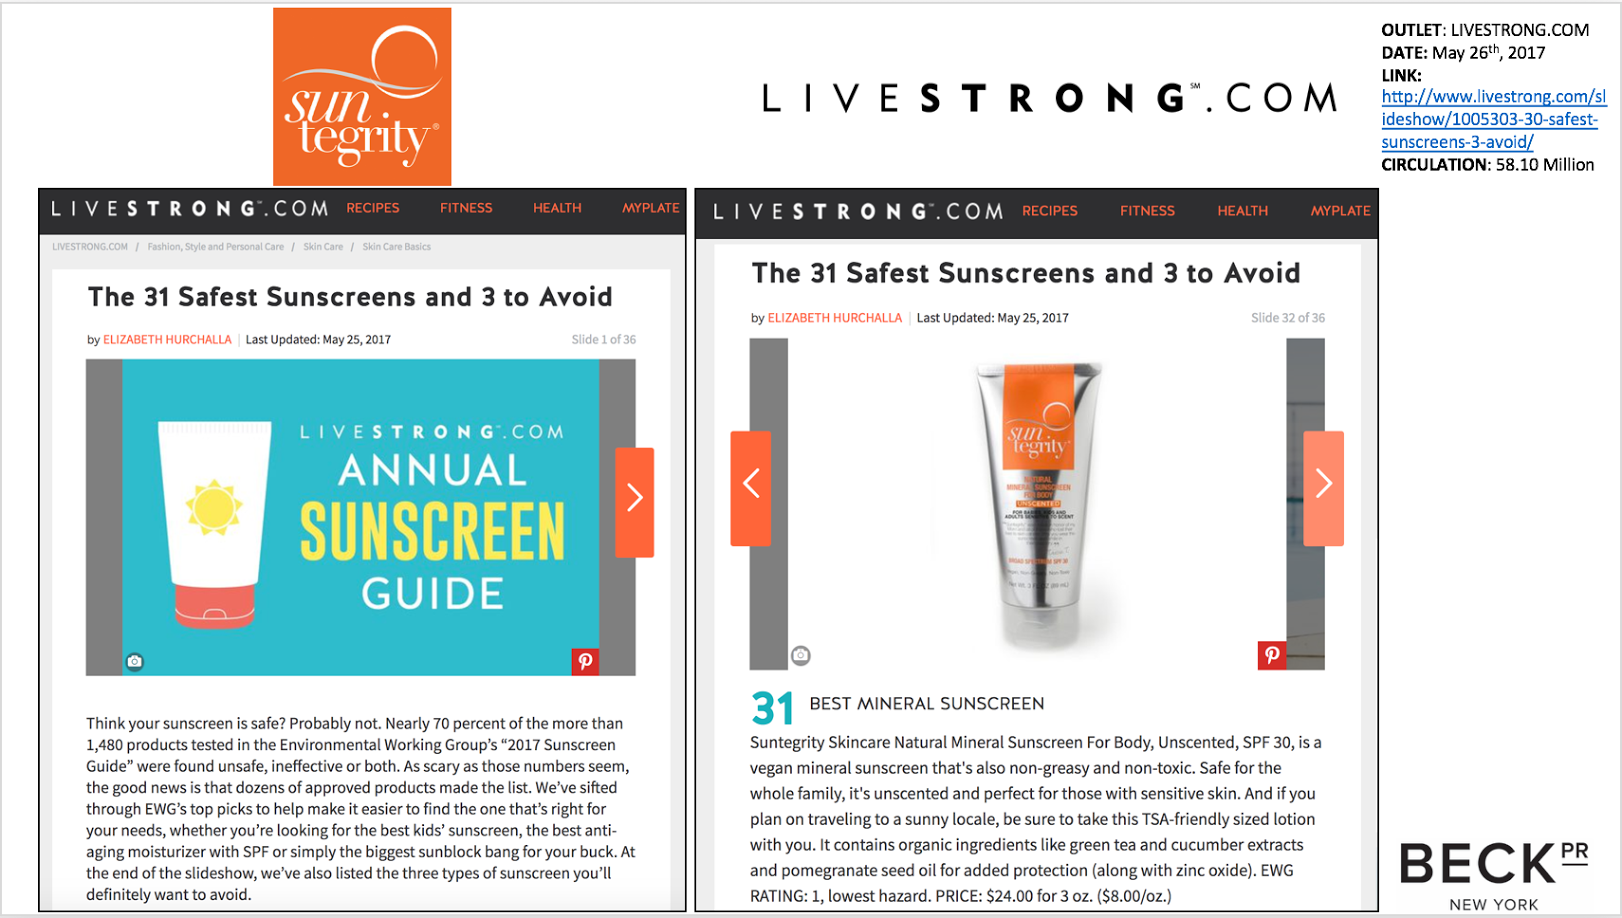 The 31 Safest Sunscreens And 3 To Avoid - Suntegrity Skincare